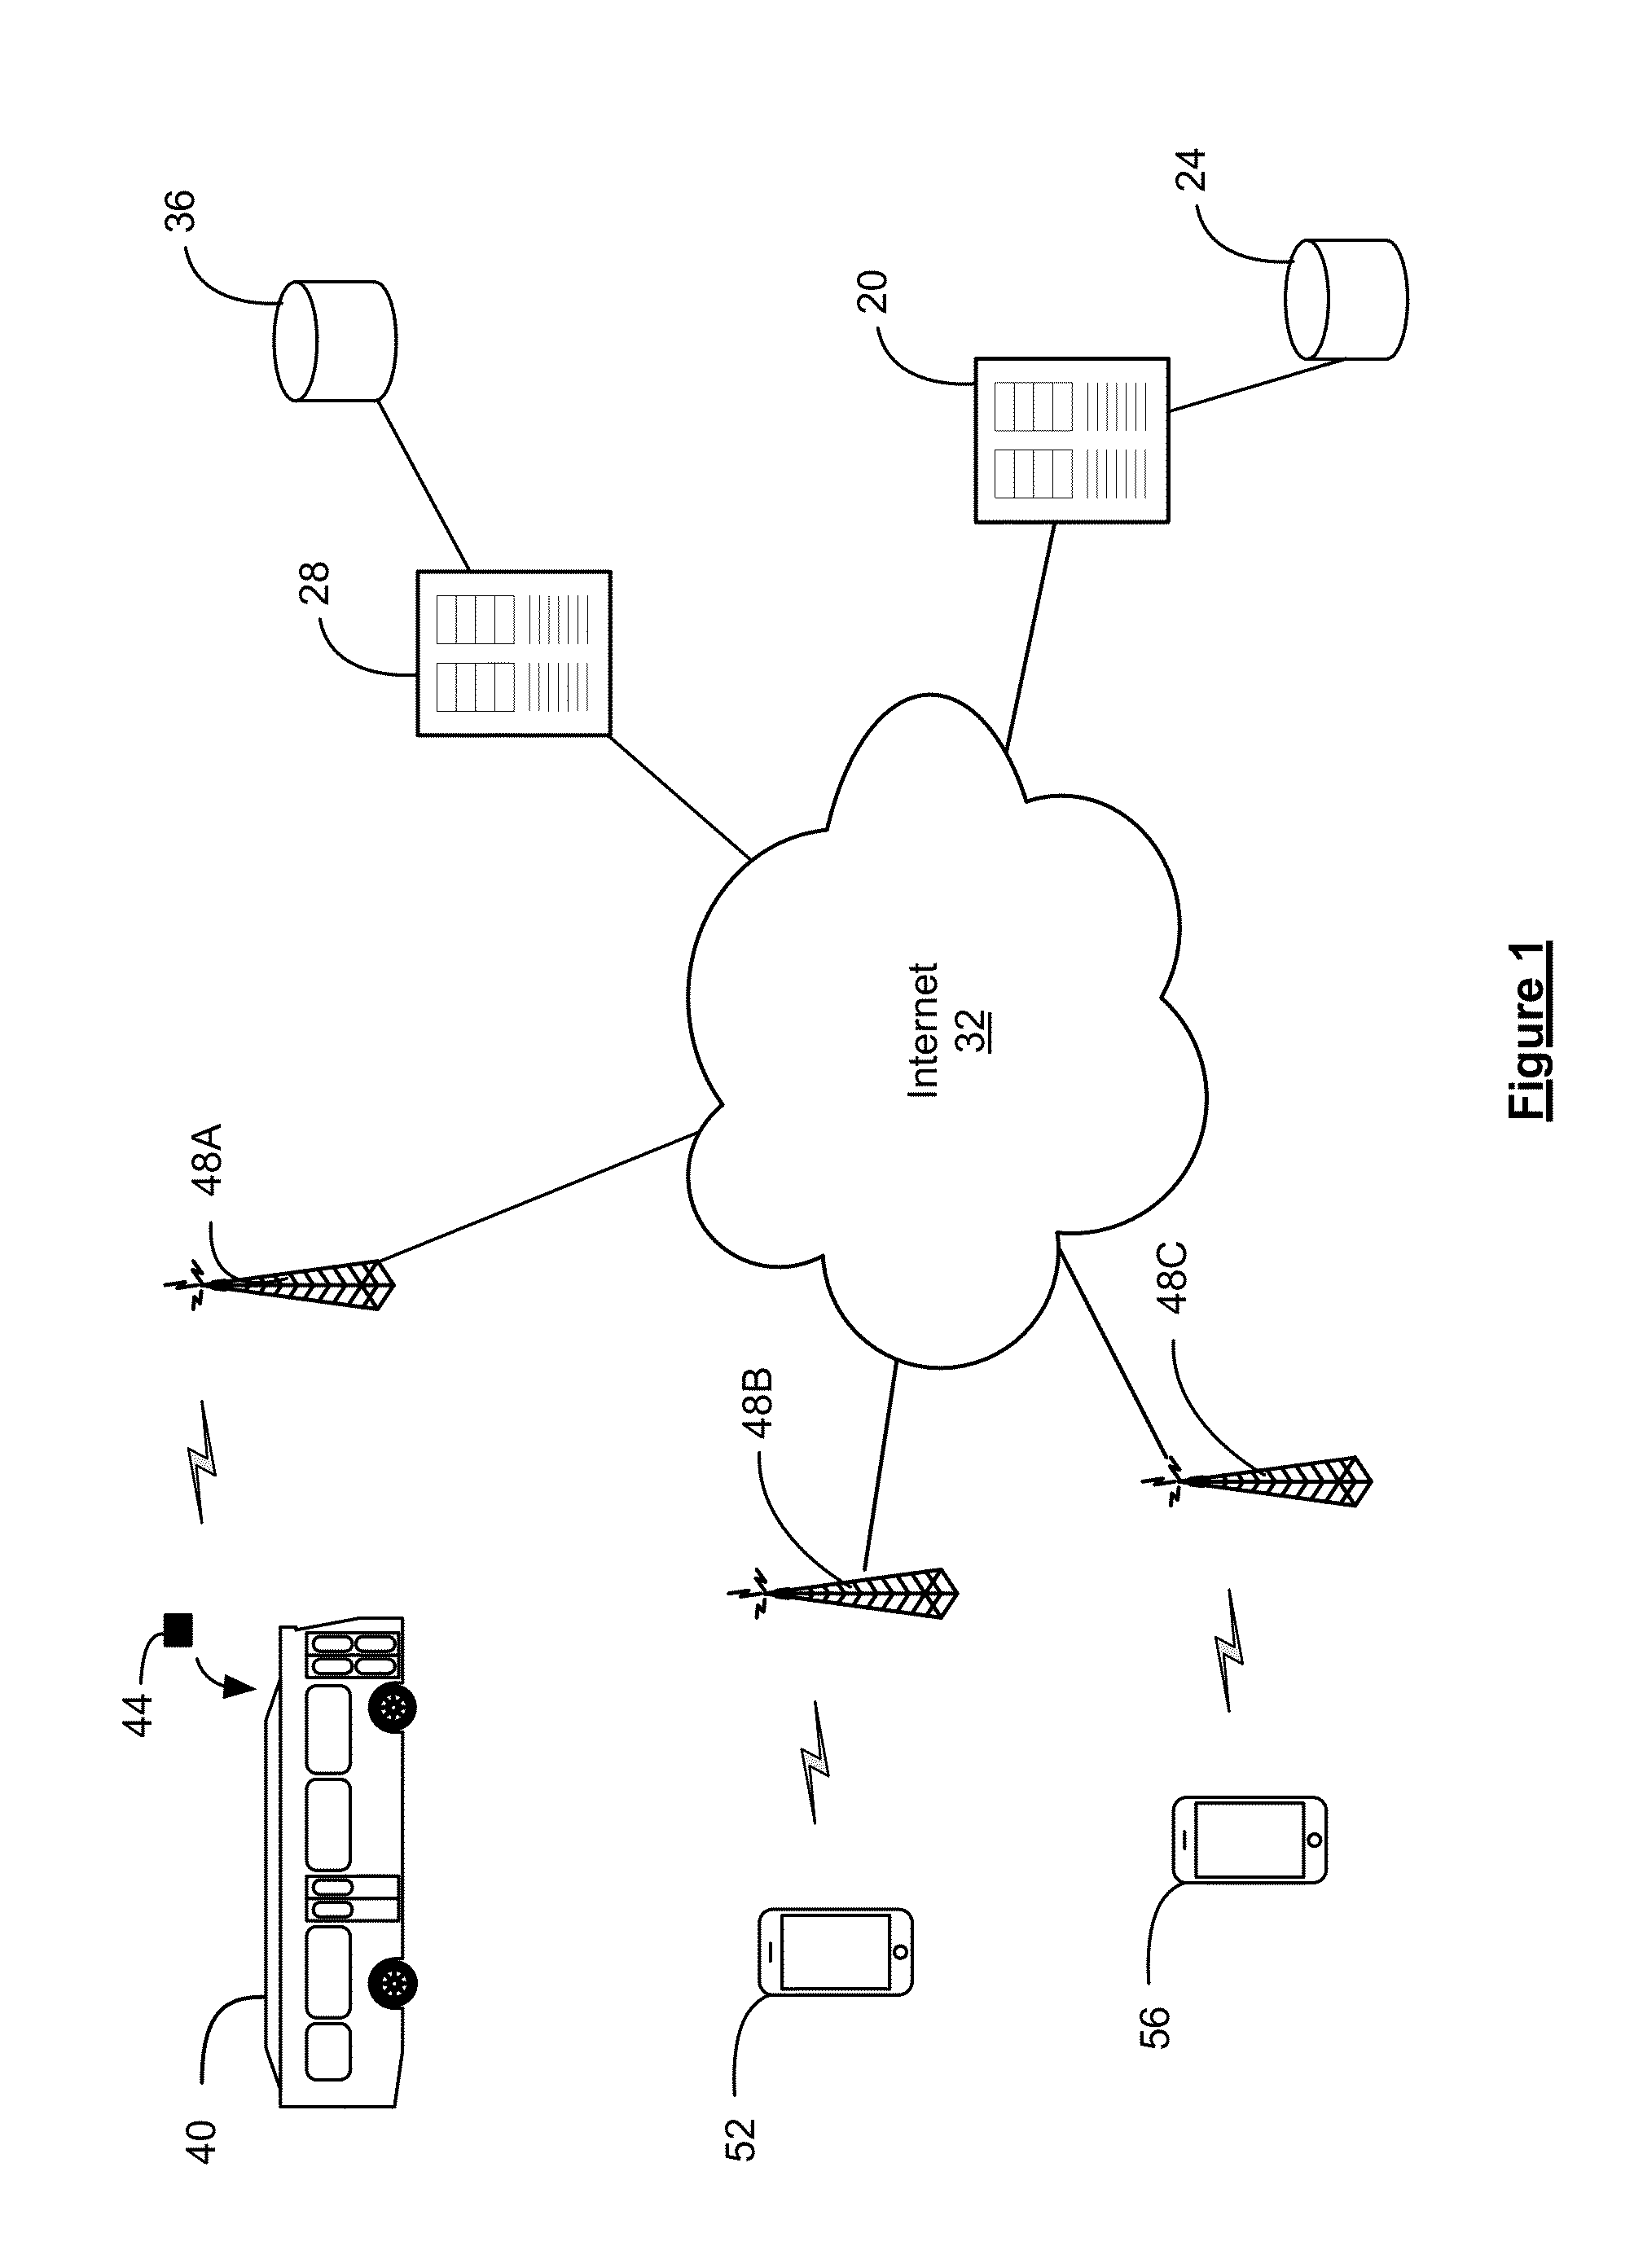 Method and system for scheduling demand-response transit service